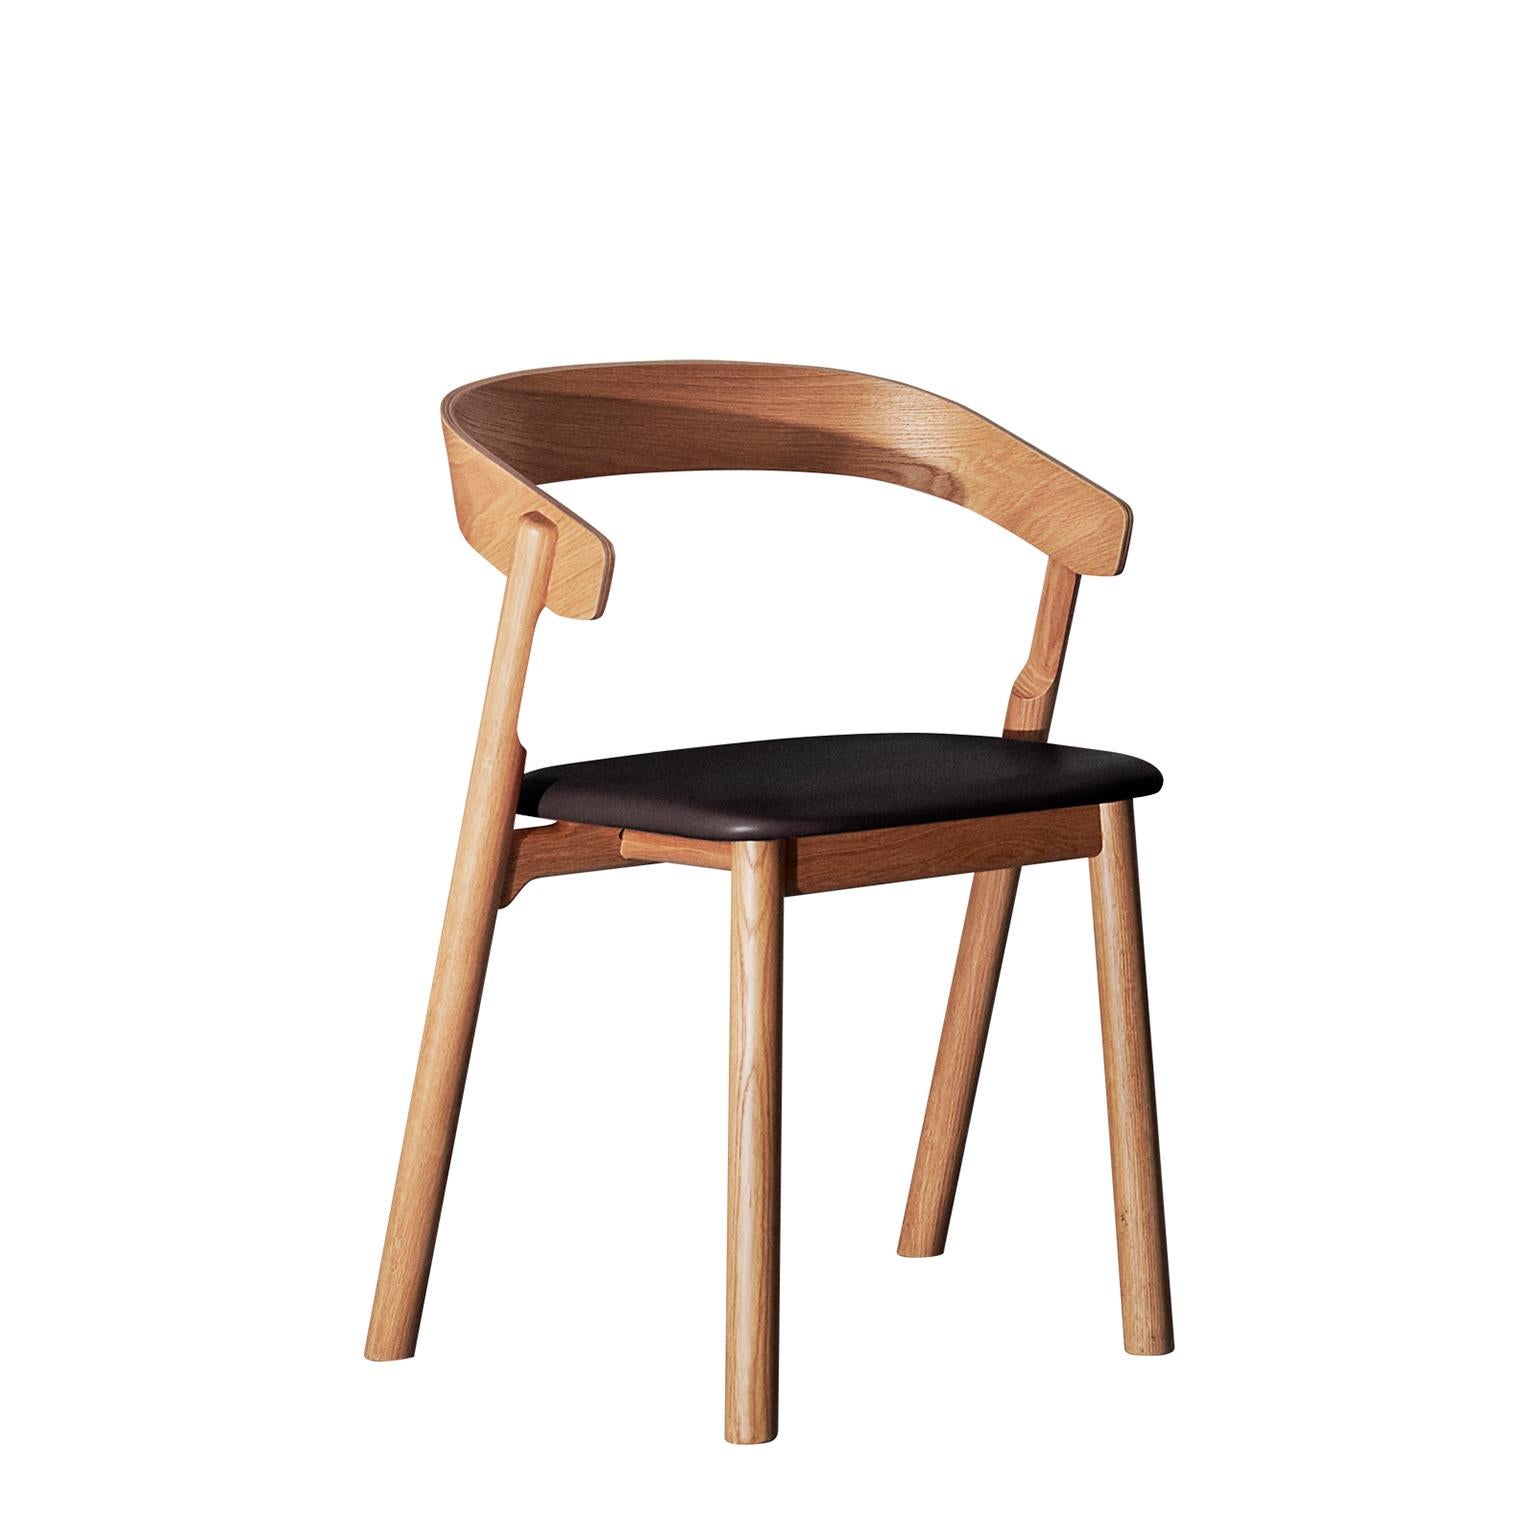 Nude dining chair with Harri Koskinen.
The Nude chair was originally tailored for one of Finland’s most prolific chef and restauranteur Pekka Terävä's 